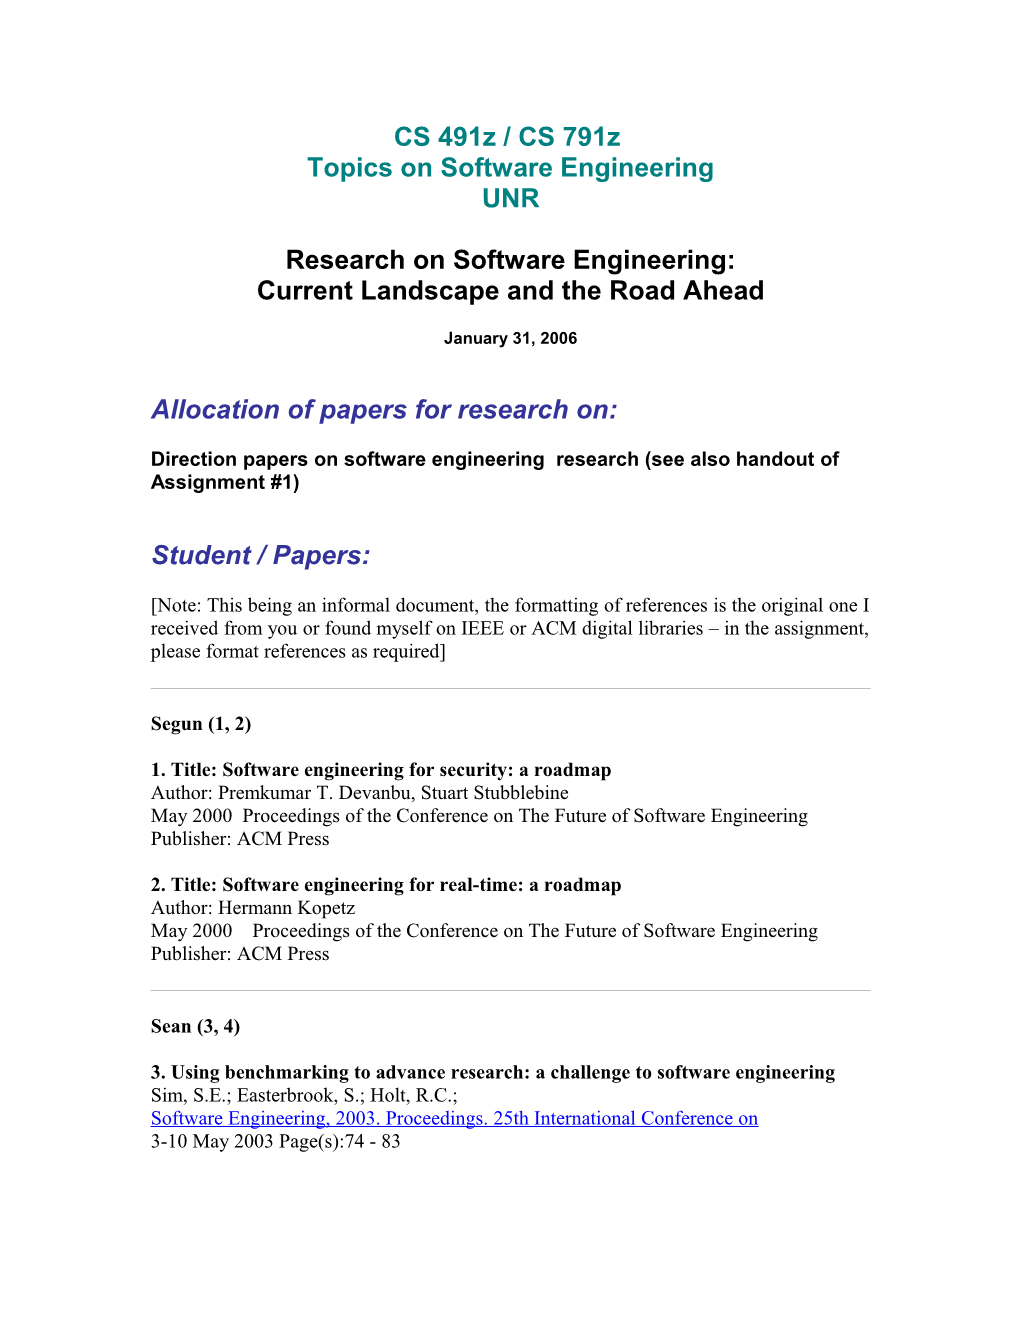 Research on Software Engineering: Current Landscape and the Road Ahead